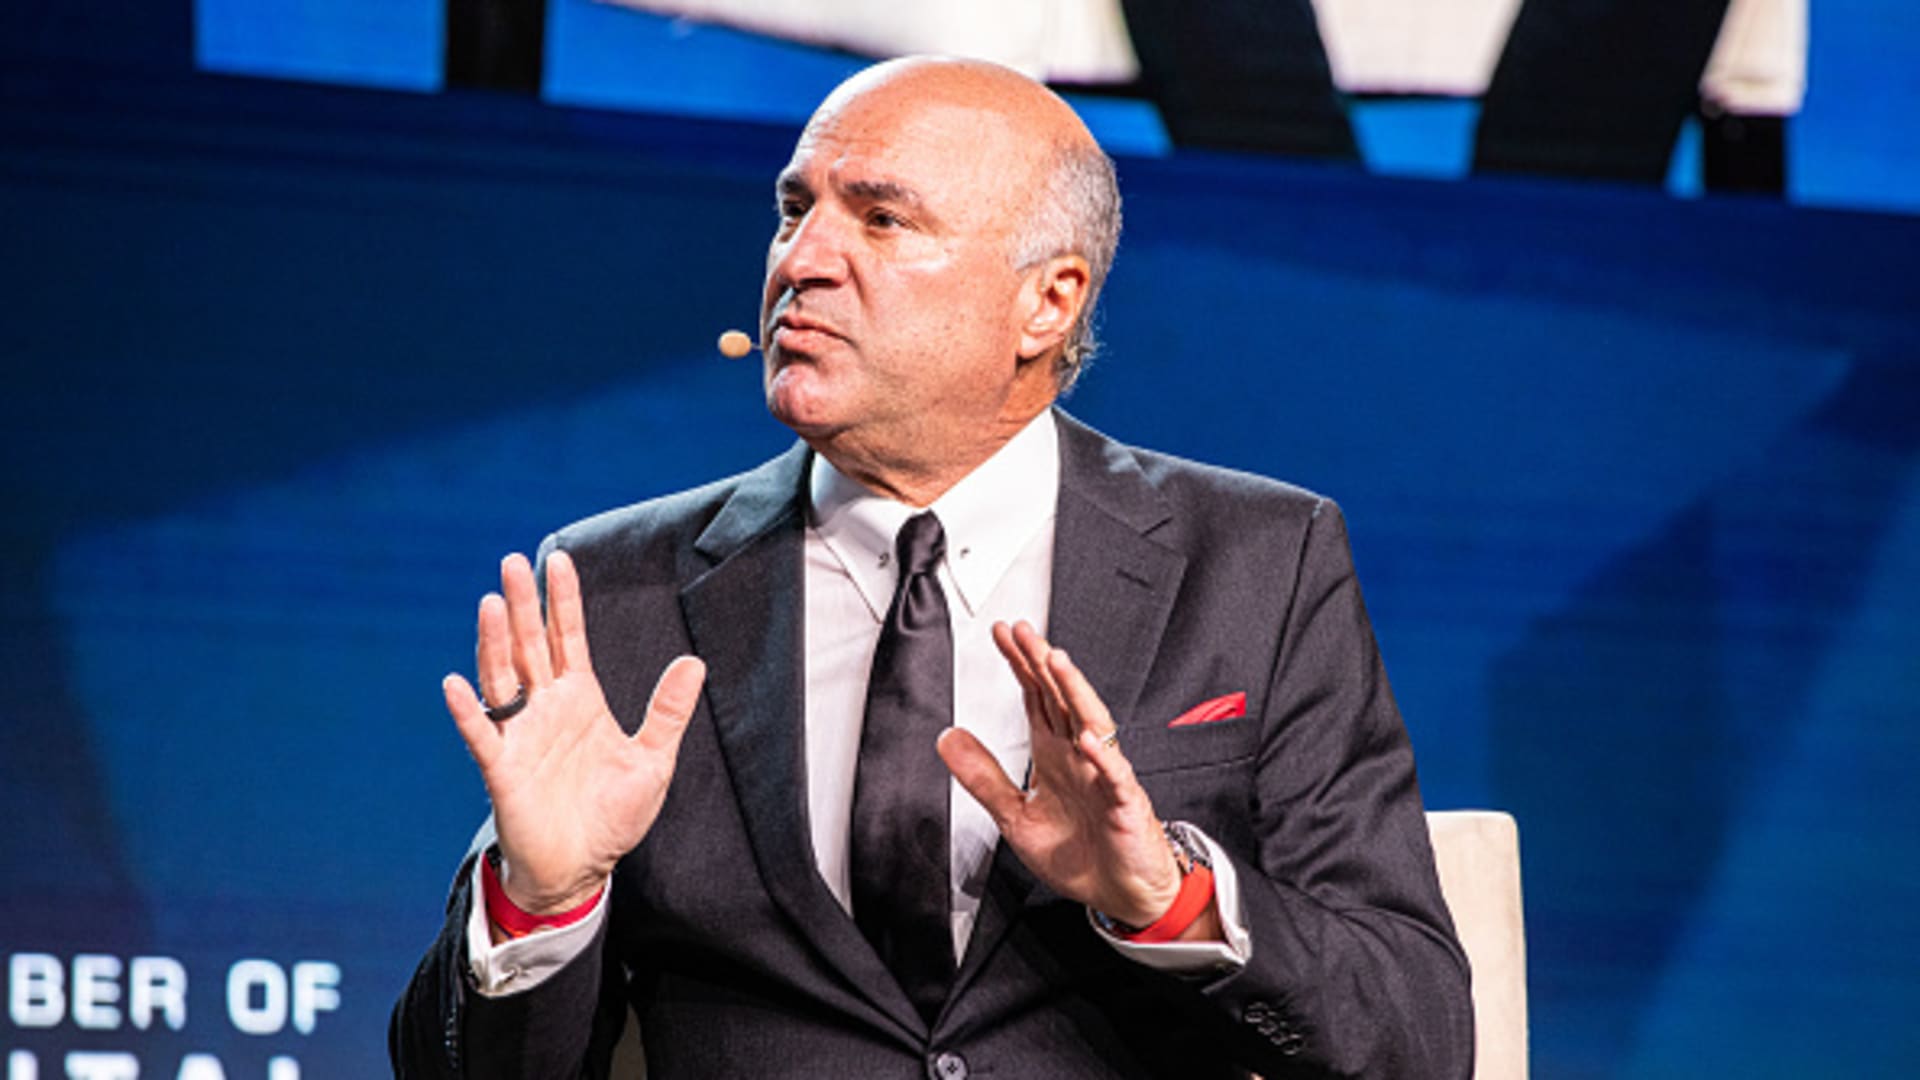 ‘Numbers don’t lie’: Kevin O’Leary says there’s no evidence of a recession right now